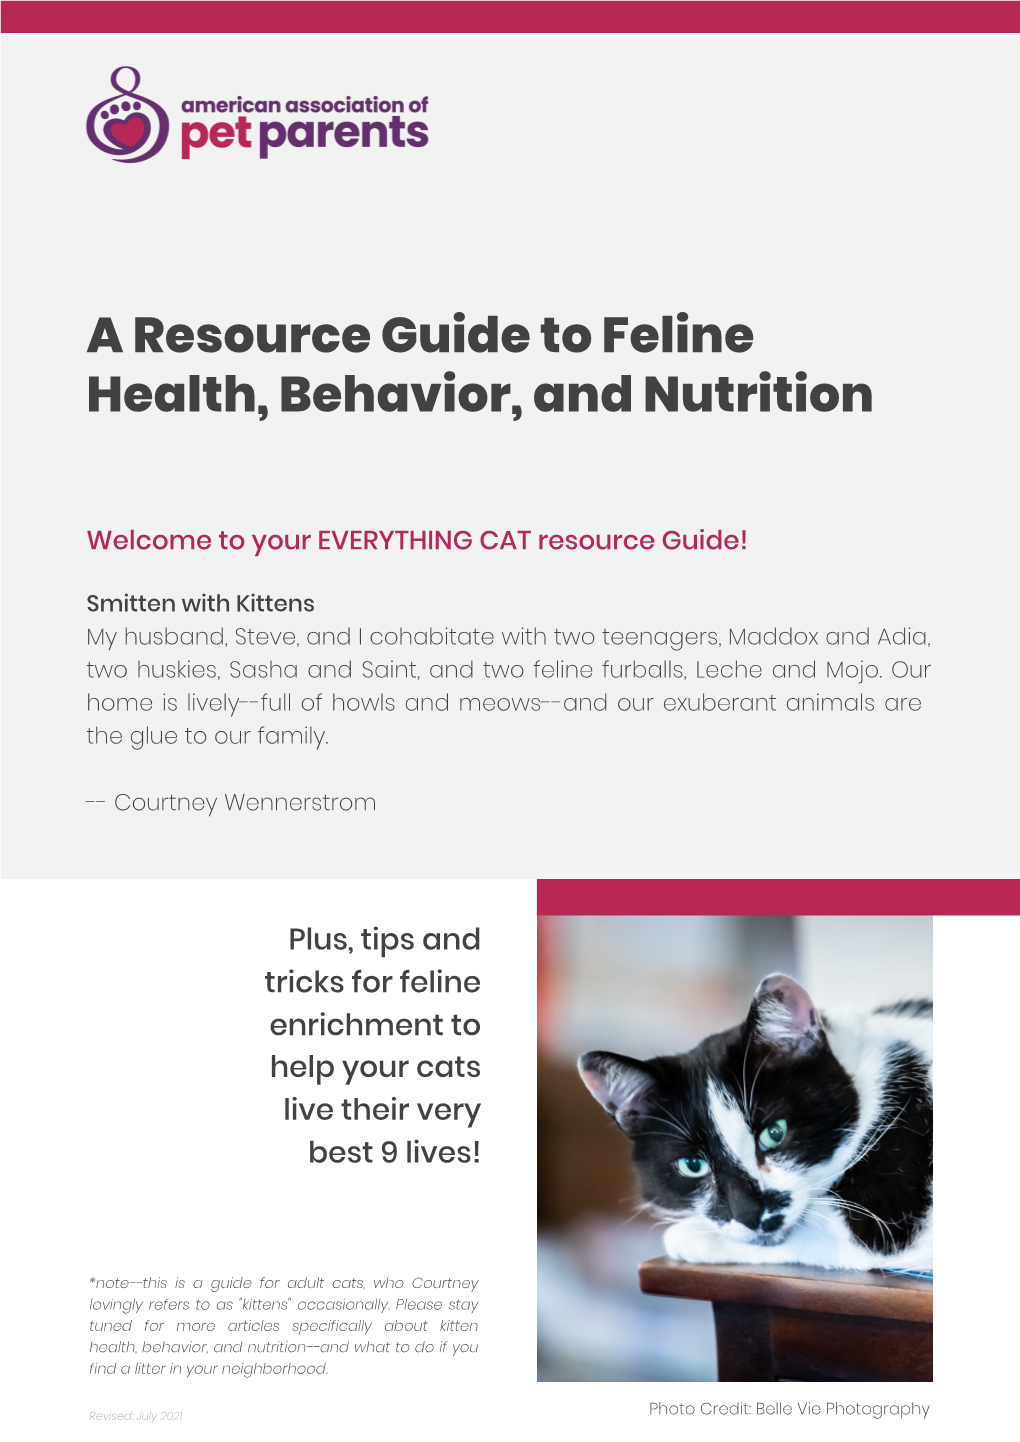 A Resource Guide to Feline Health, Behavior, and Nutrition